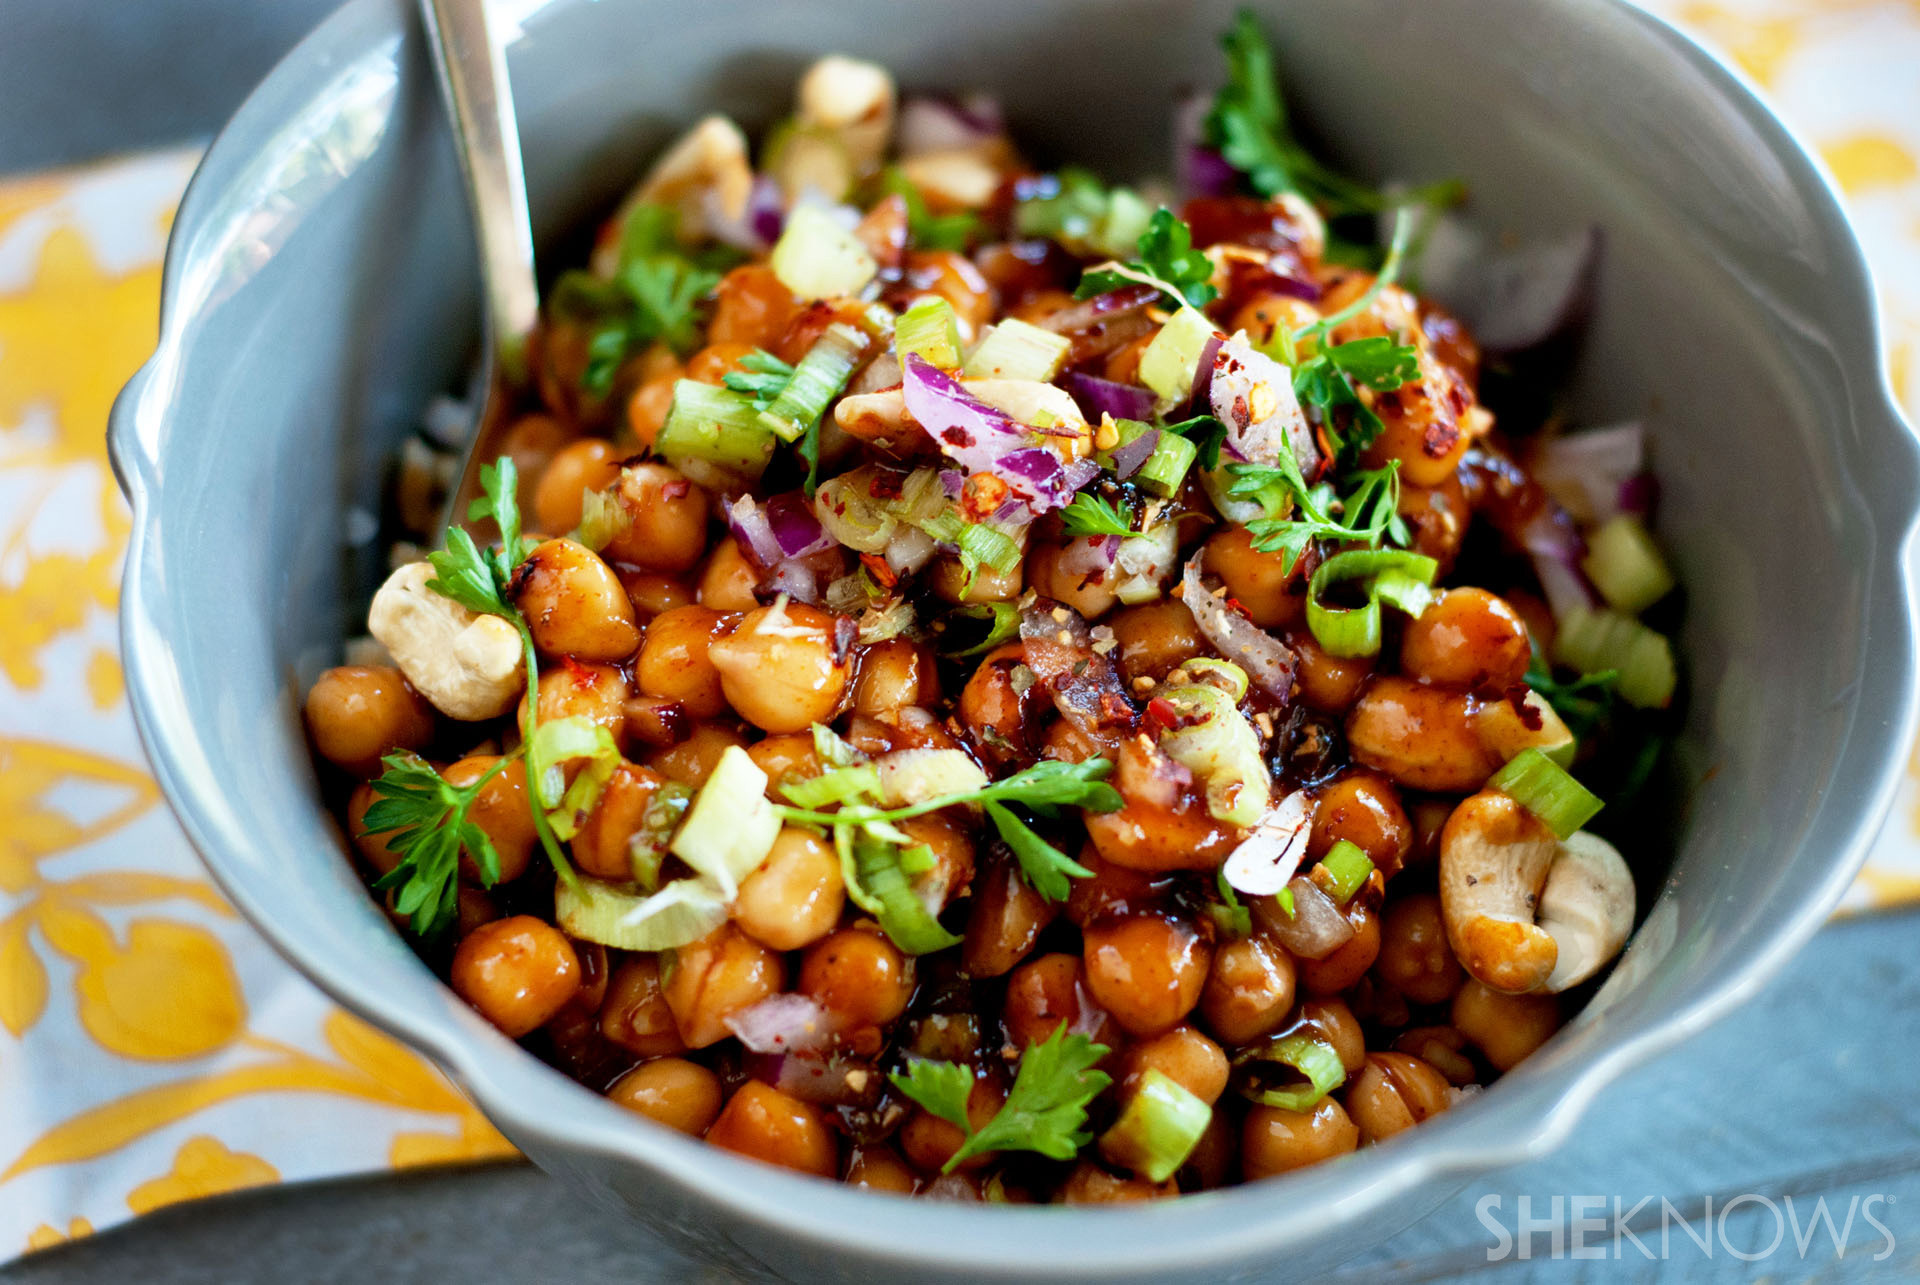 Vegetarian Chickpea Recipes
 Kung pao chickpeas Turn a favorite Chinese takeout dish vegan